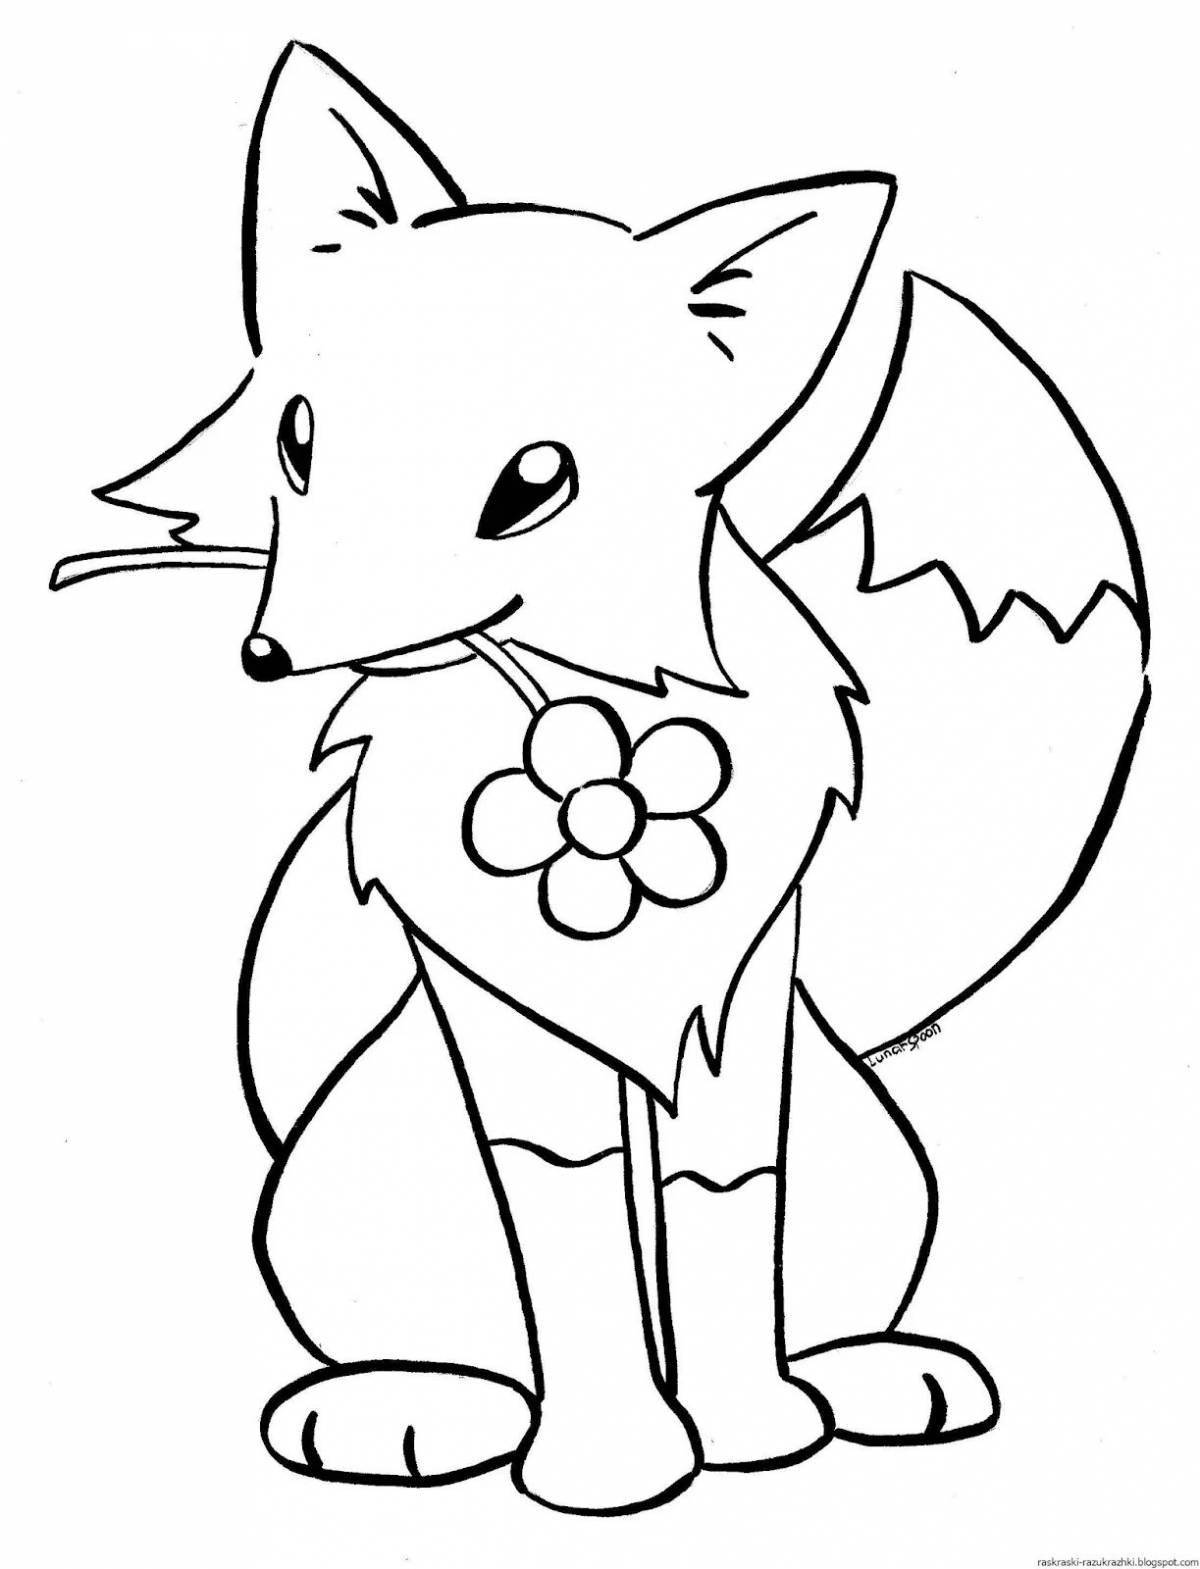 Fun coloring fox for children 6-7 years old